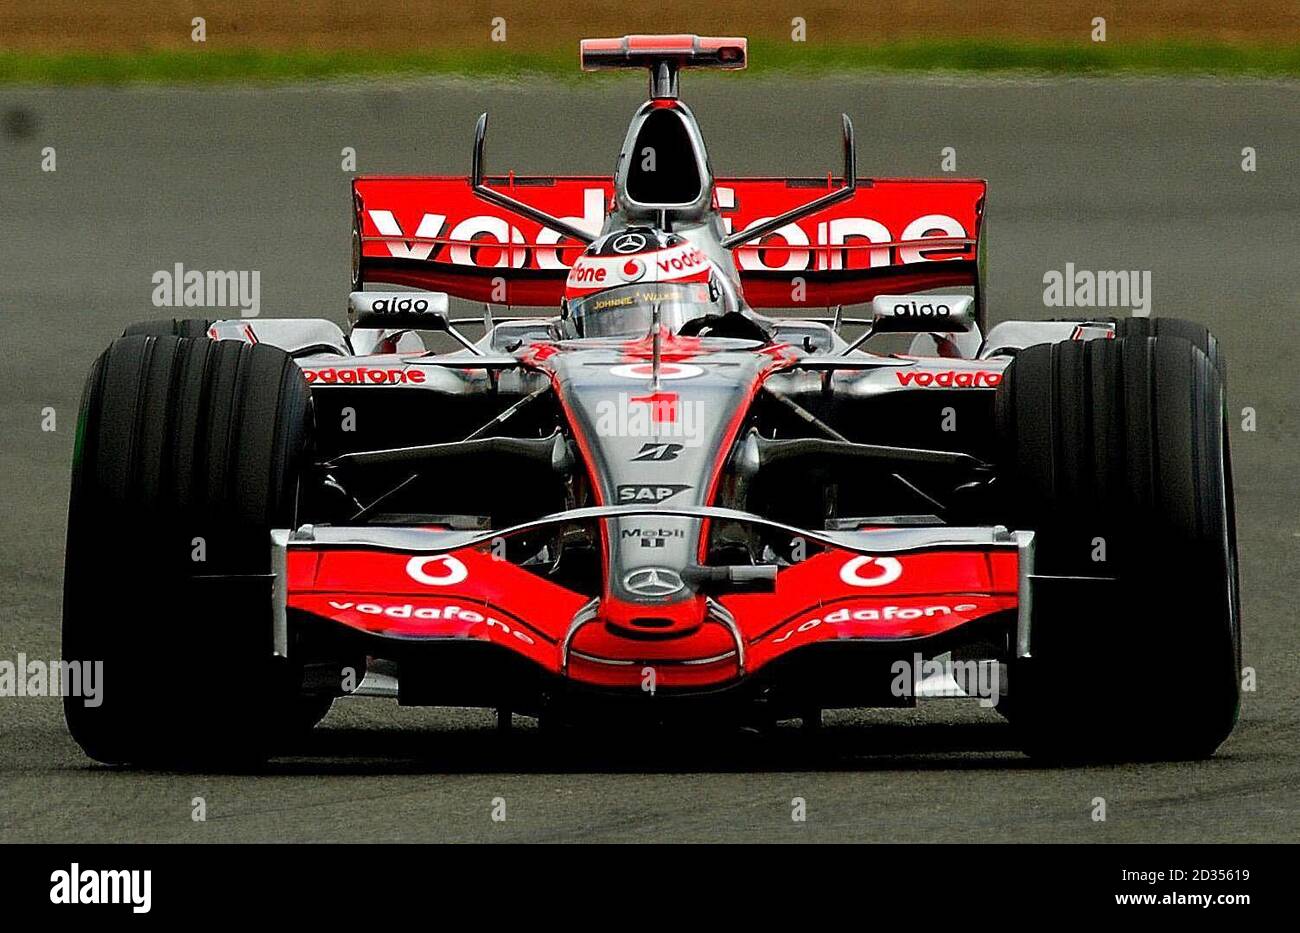 Spain's Fernando Alonso driving a McLaren Mercedes during first practice  for the British Grand Prix at Silverstone, Northamptonshire Stock Photo -  Alamy